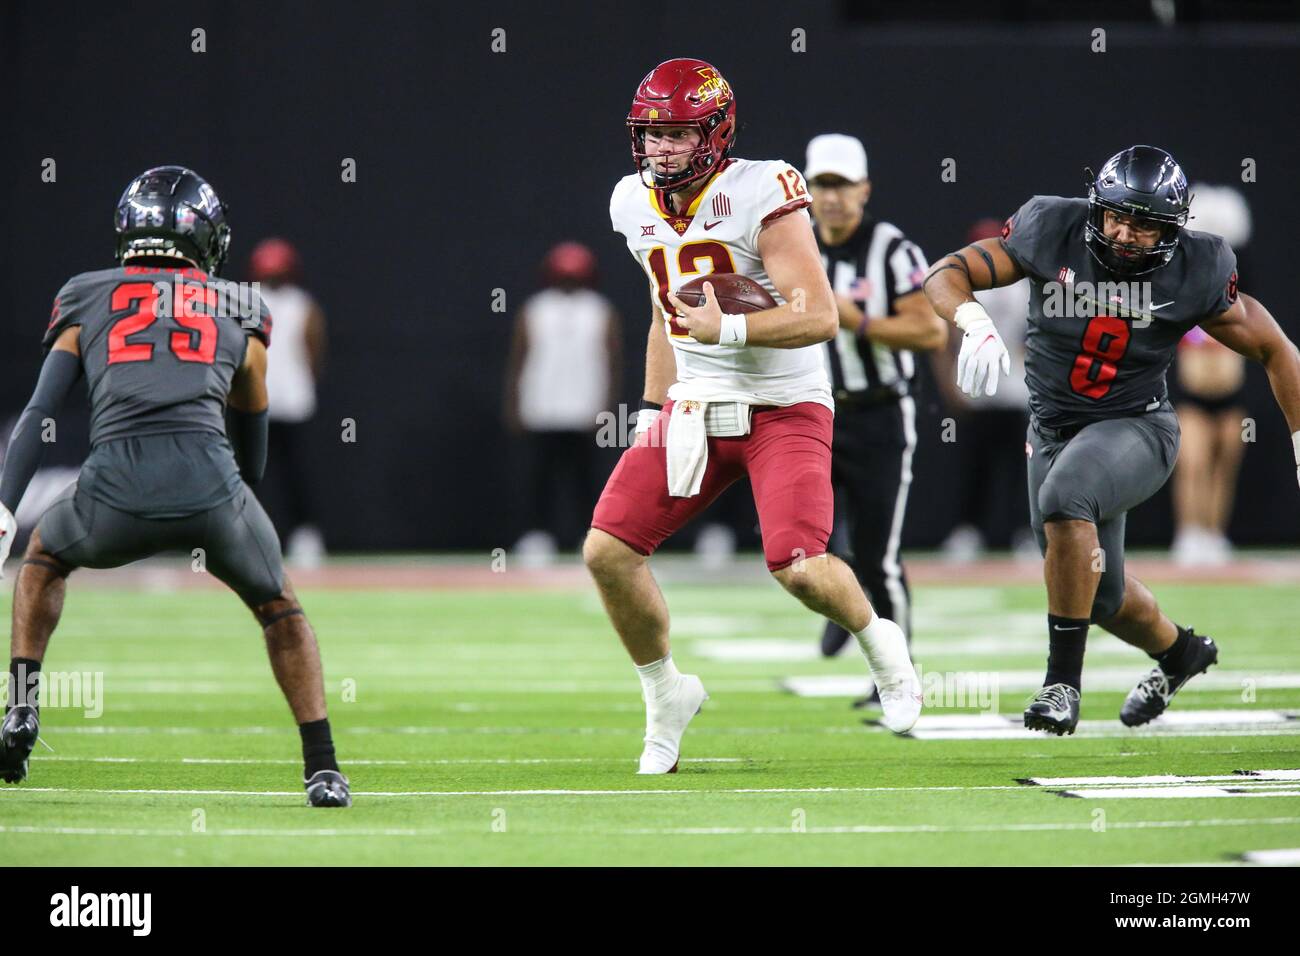 Las Vegas, NV, USA. 18th Sep, 2021. Iowa State Cyclones quarterback Hunter Dekkers (12) runs with the football during the NCAA football game featuring the Iowa State Cyclones and the UNLV Rebels at Allegiant Stadium in Las Vegas, NV. The Iowa State Cyclones defeated the UNLV Rebels 48 to 3. Christopher Trim/CSM/Alamy Live News Stock Photo